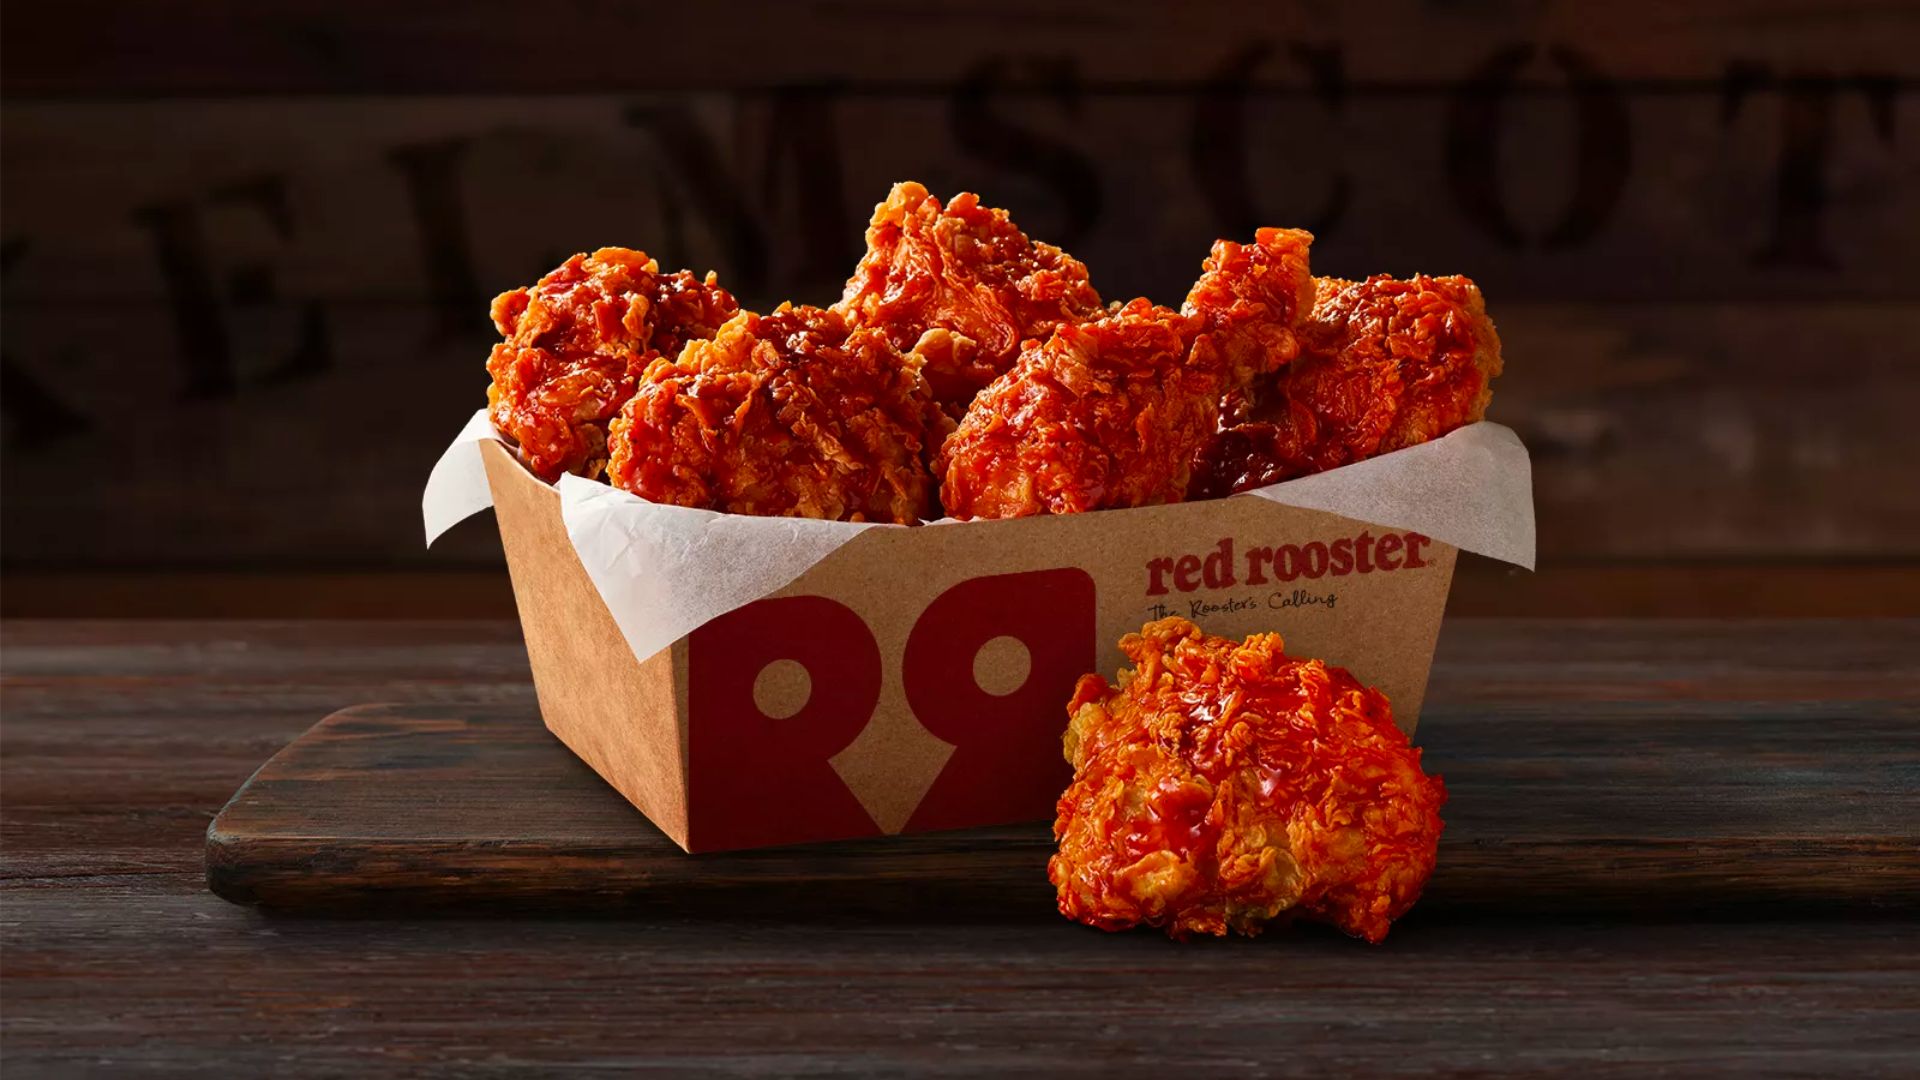 Red Rooster fried chicken